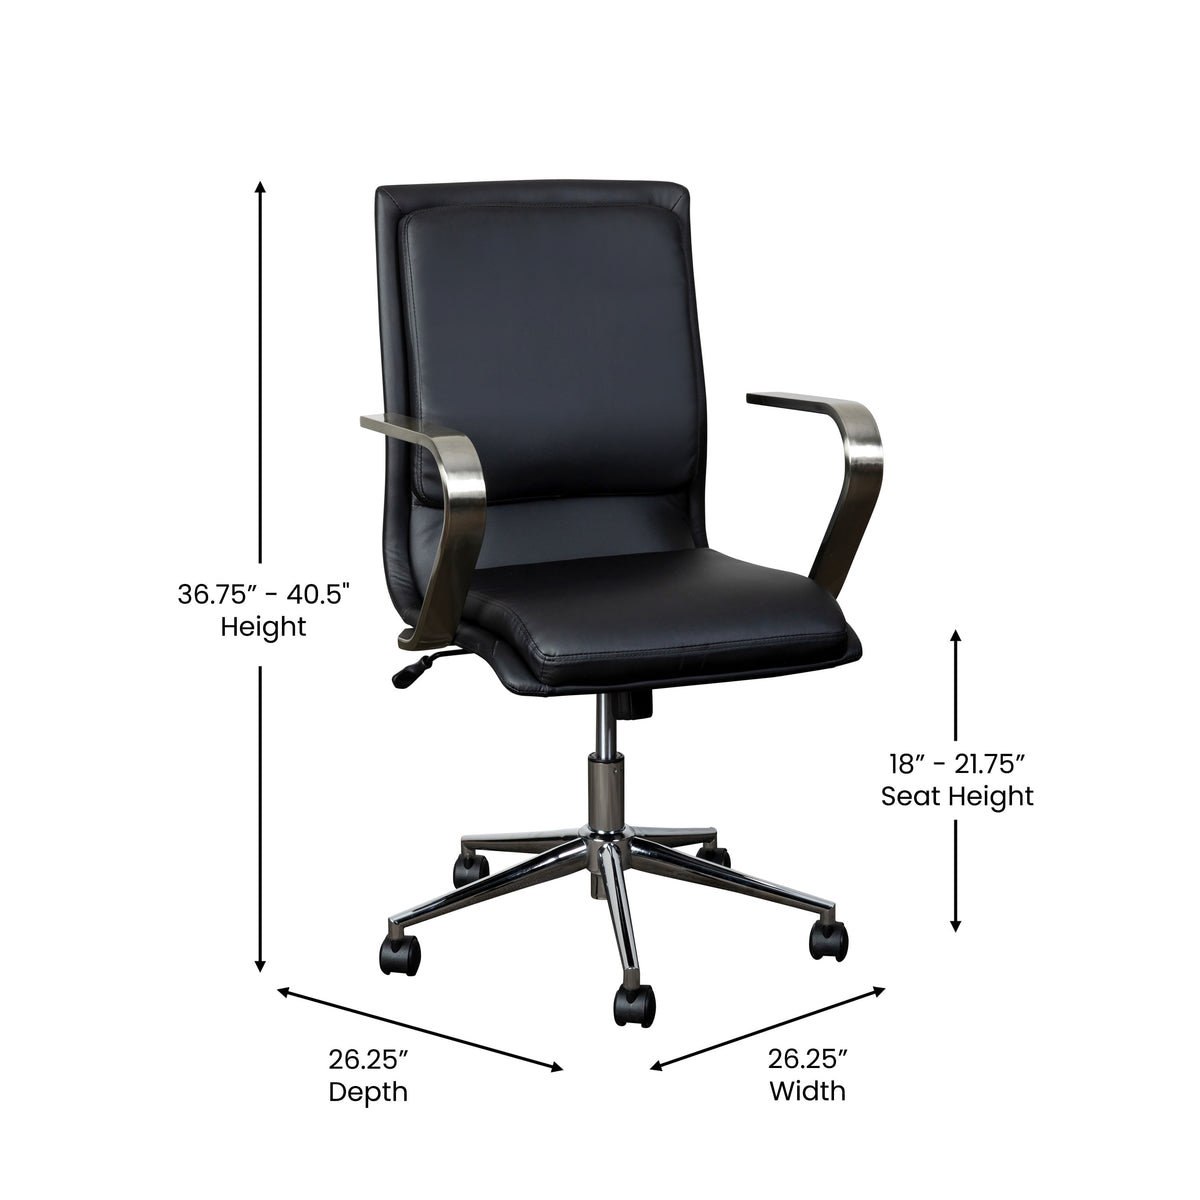 Black LeatherSoft/Chrome Frame |#| Designer Executive Swivel Office Chair with Brushed Chrome Arms and Base, Black